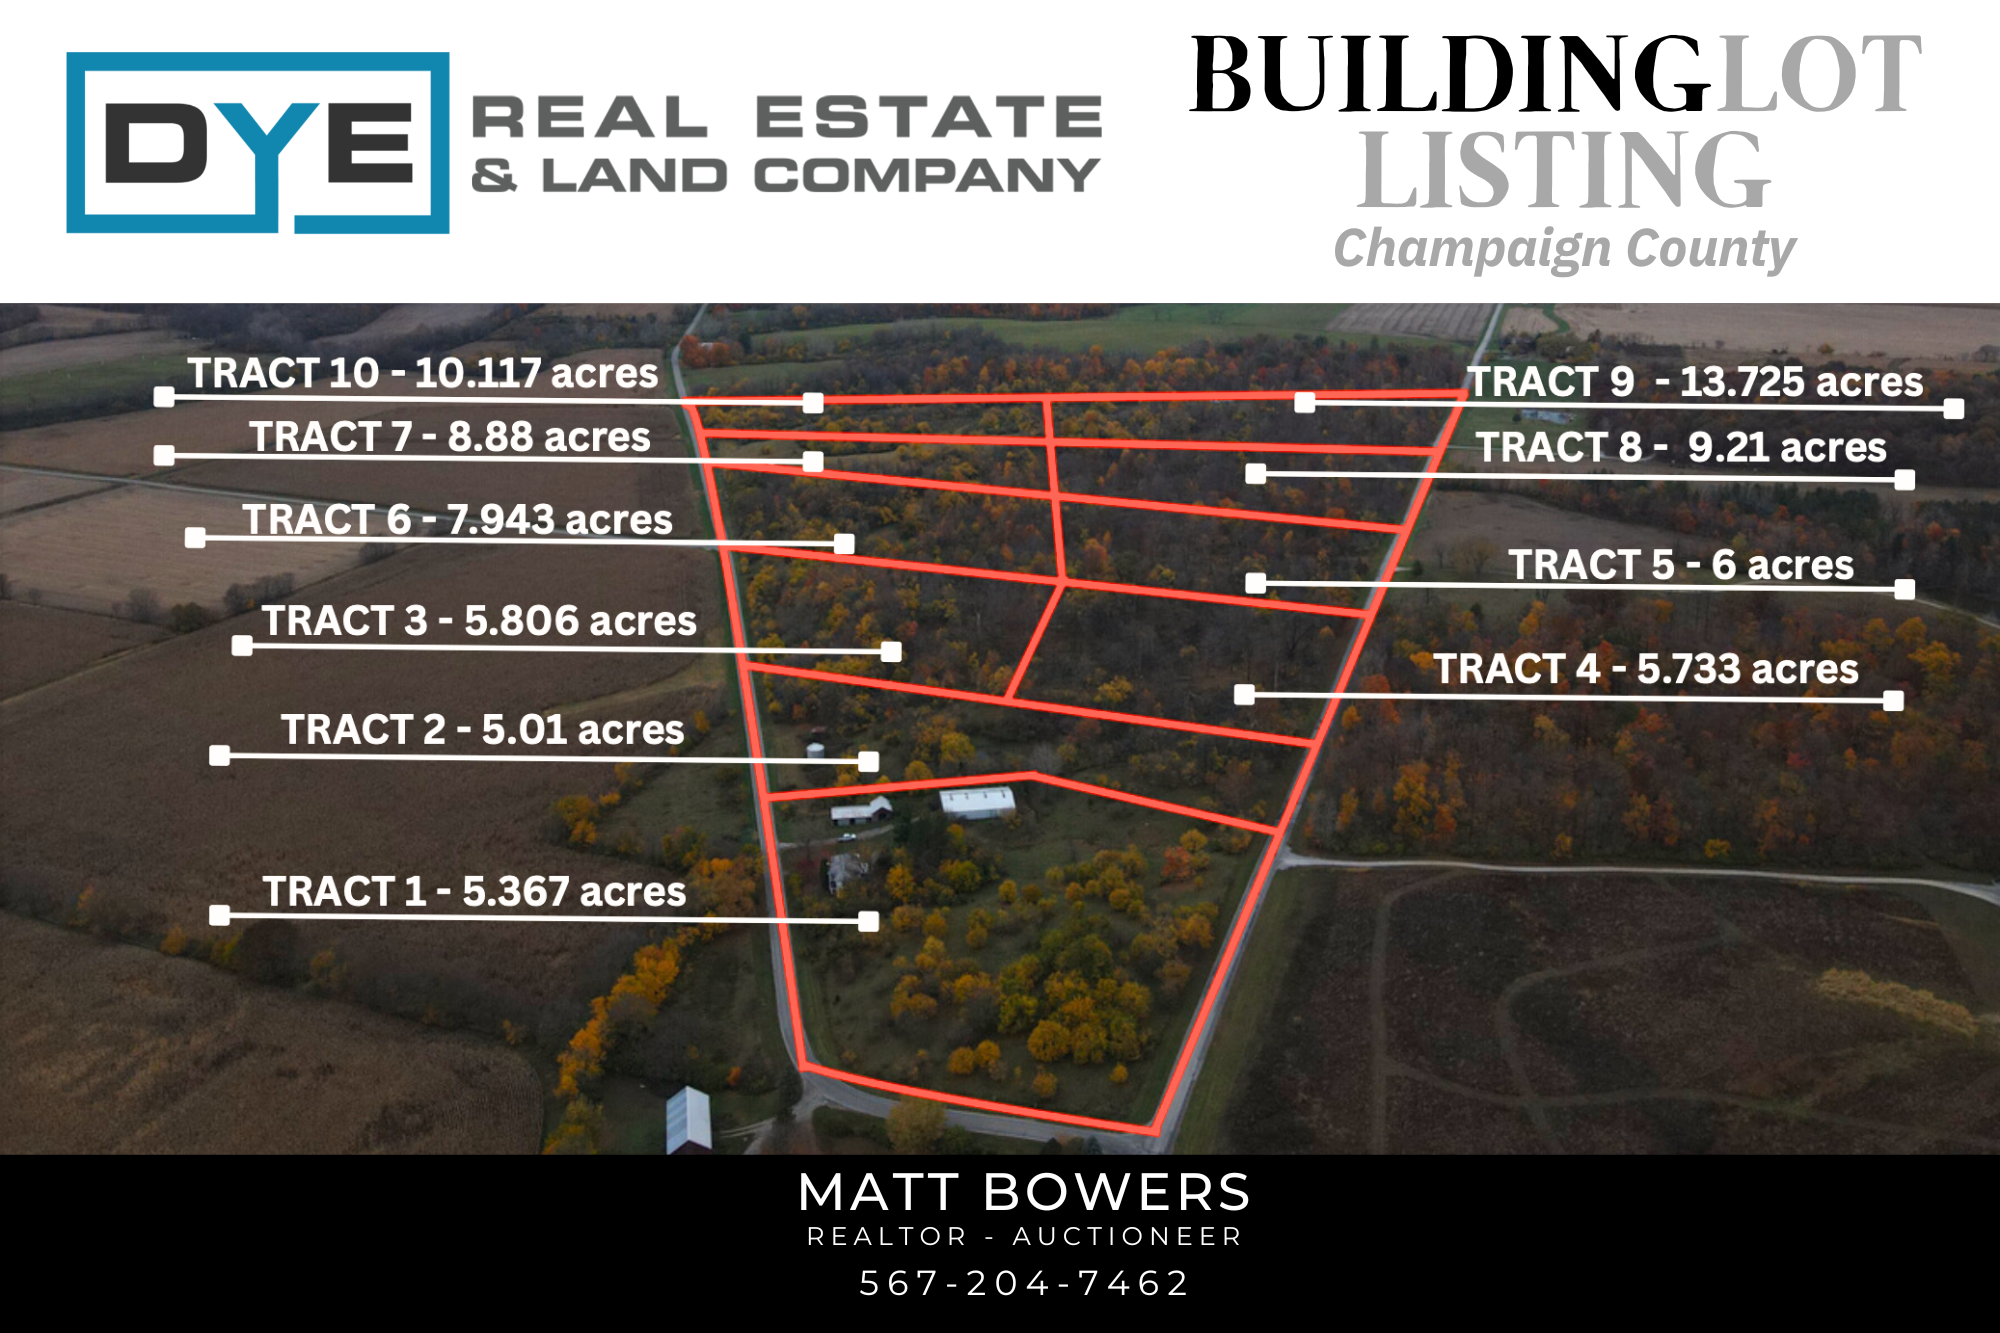 10 Building Lots - Champaign County